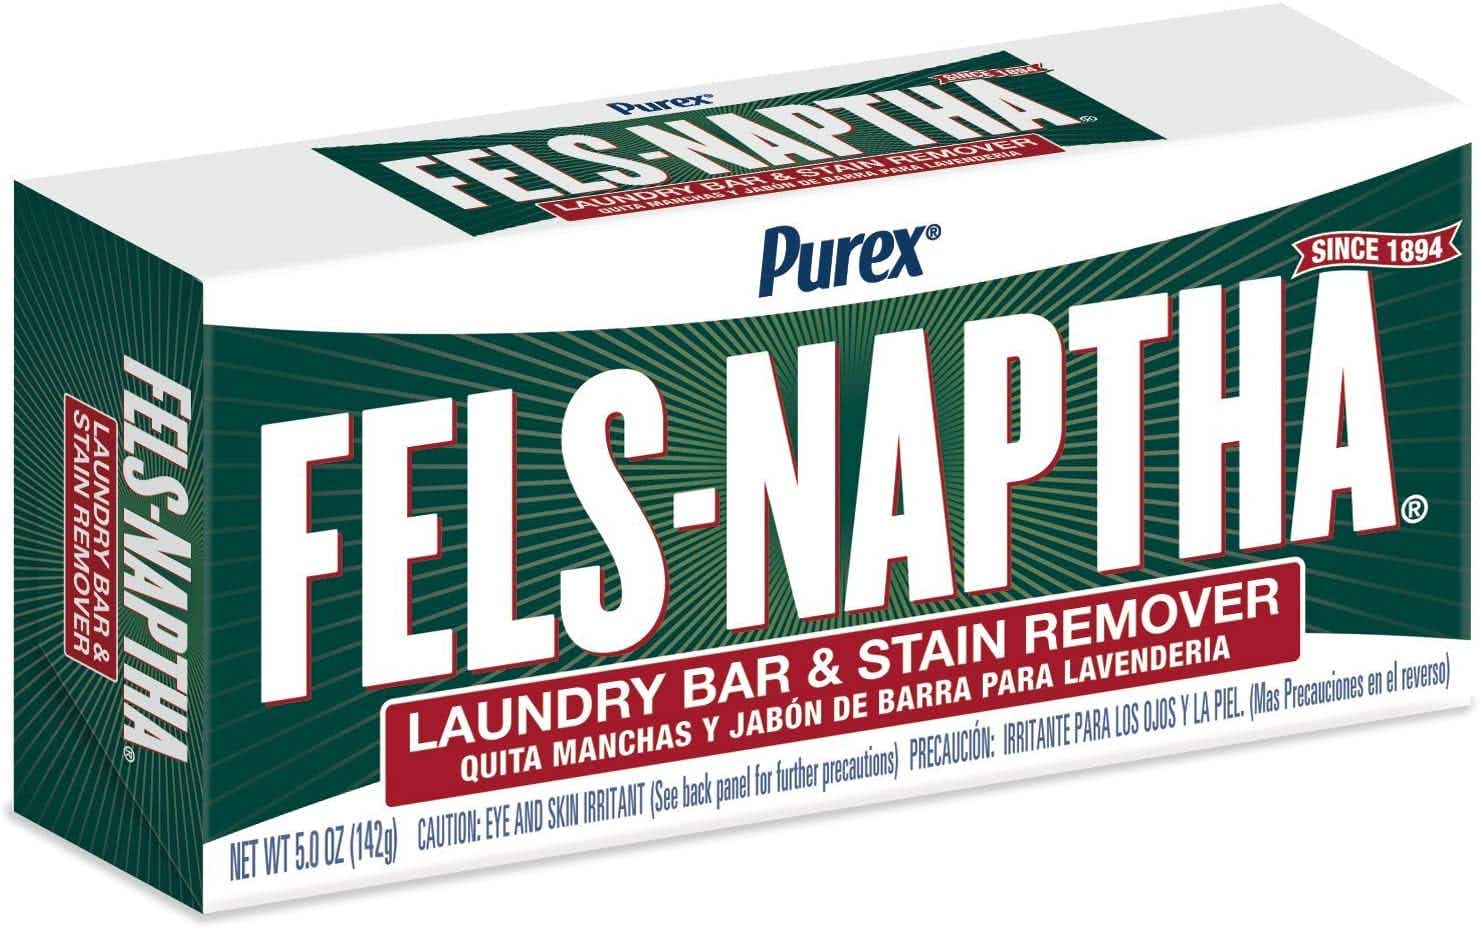 A box of the Purex Fels-Naptha laundry bar on a white background